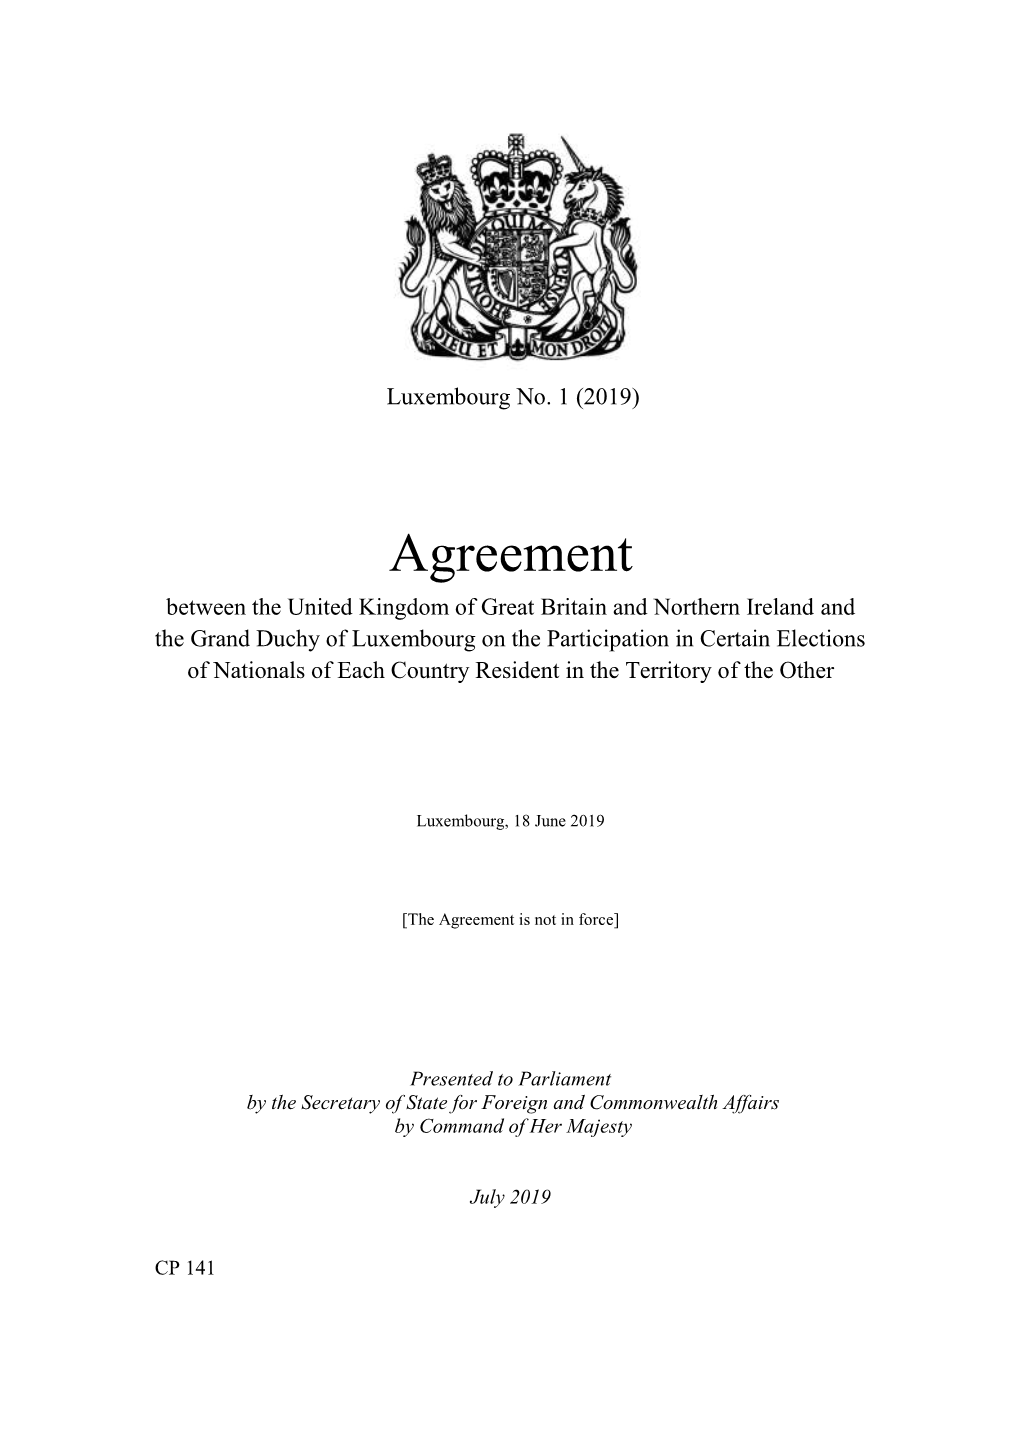 Agreement Between the United Kingdom of Great Britain And